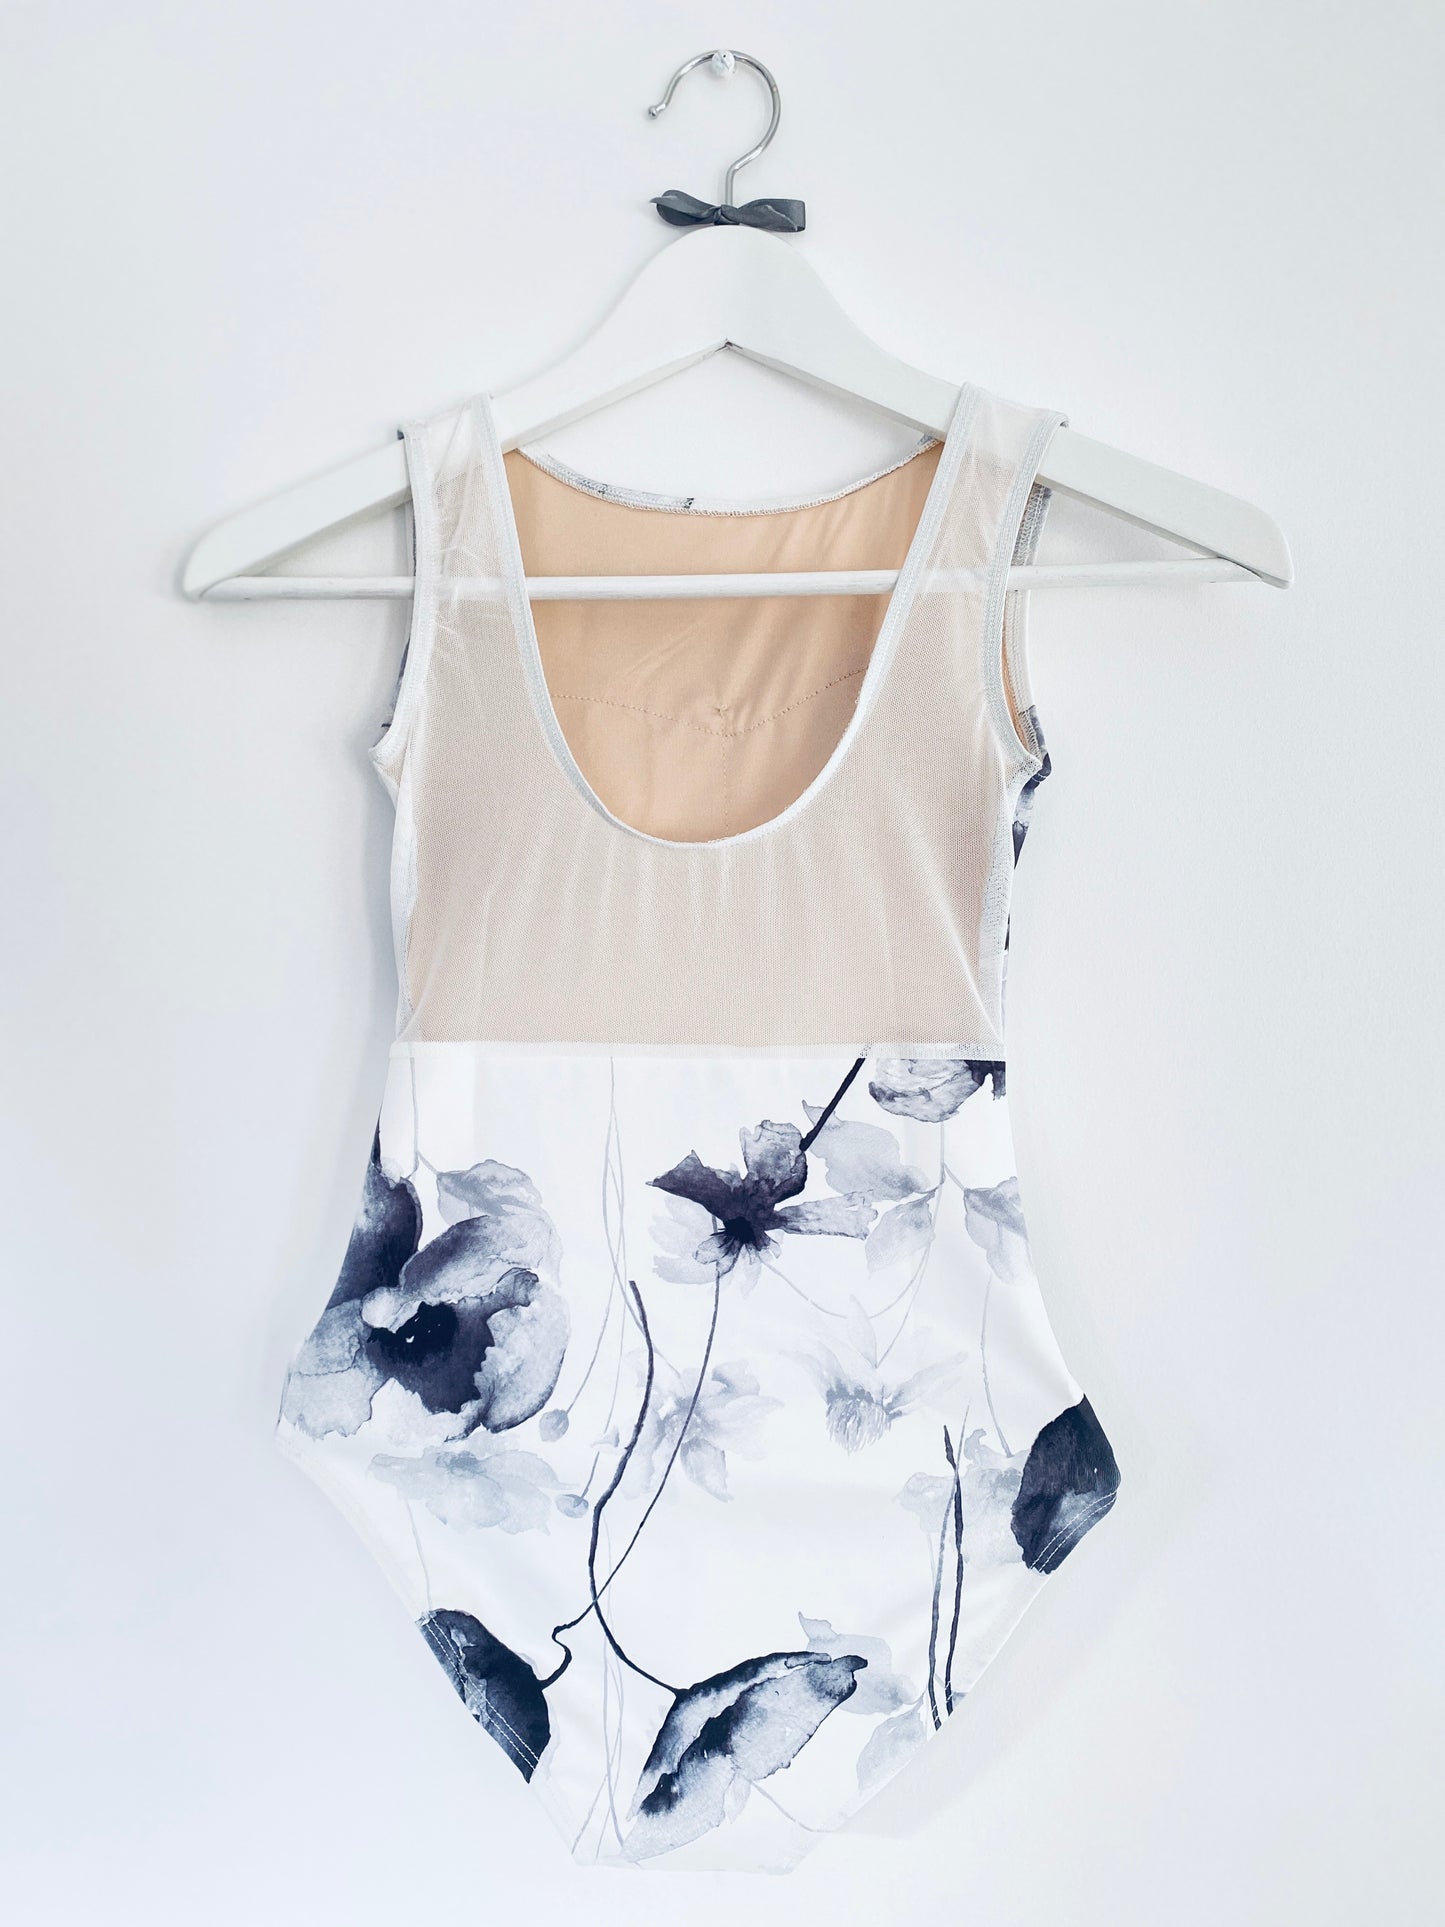 Sleeveless tank leotard with monochrome poppy pattern on white body from The Collective Dancewear